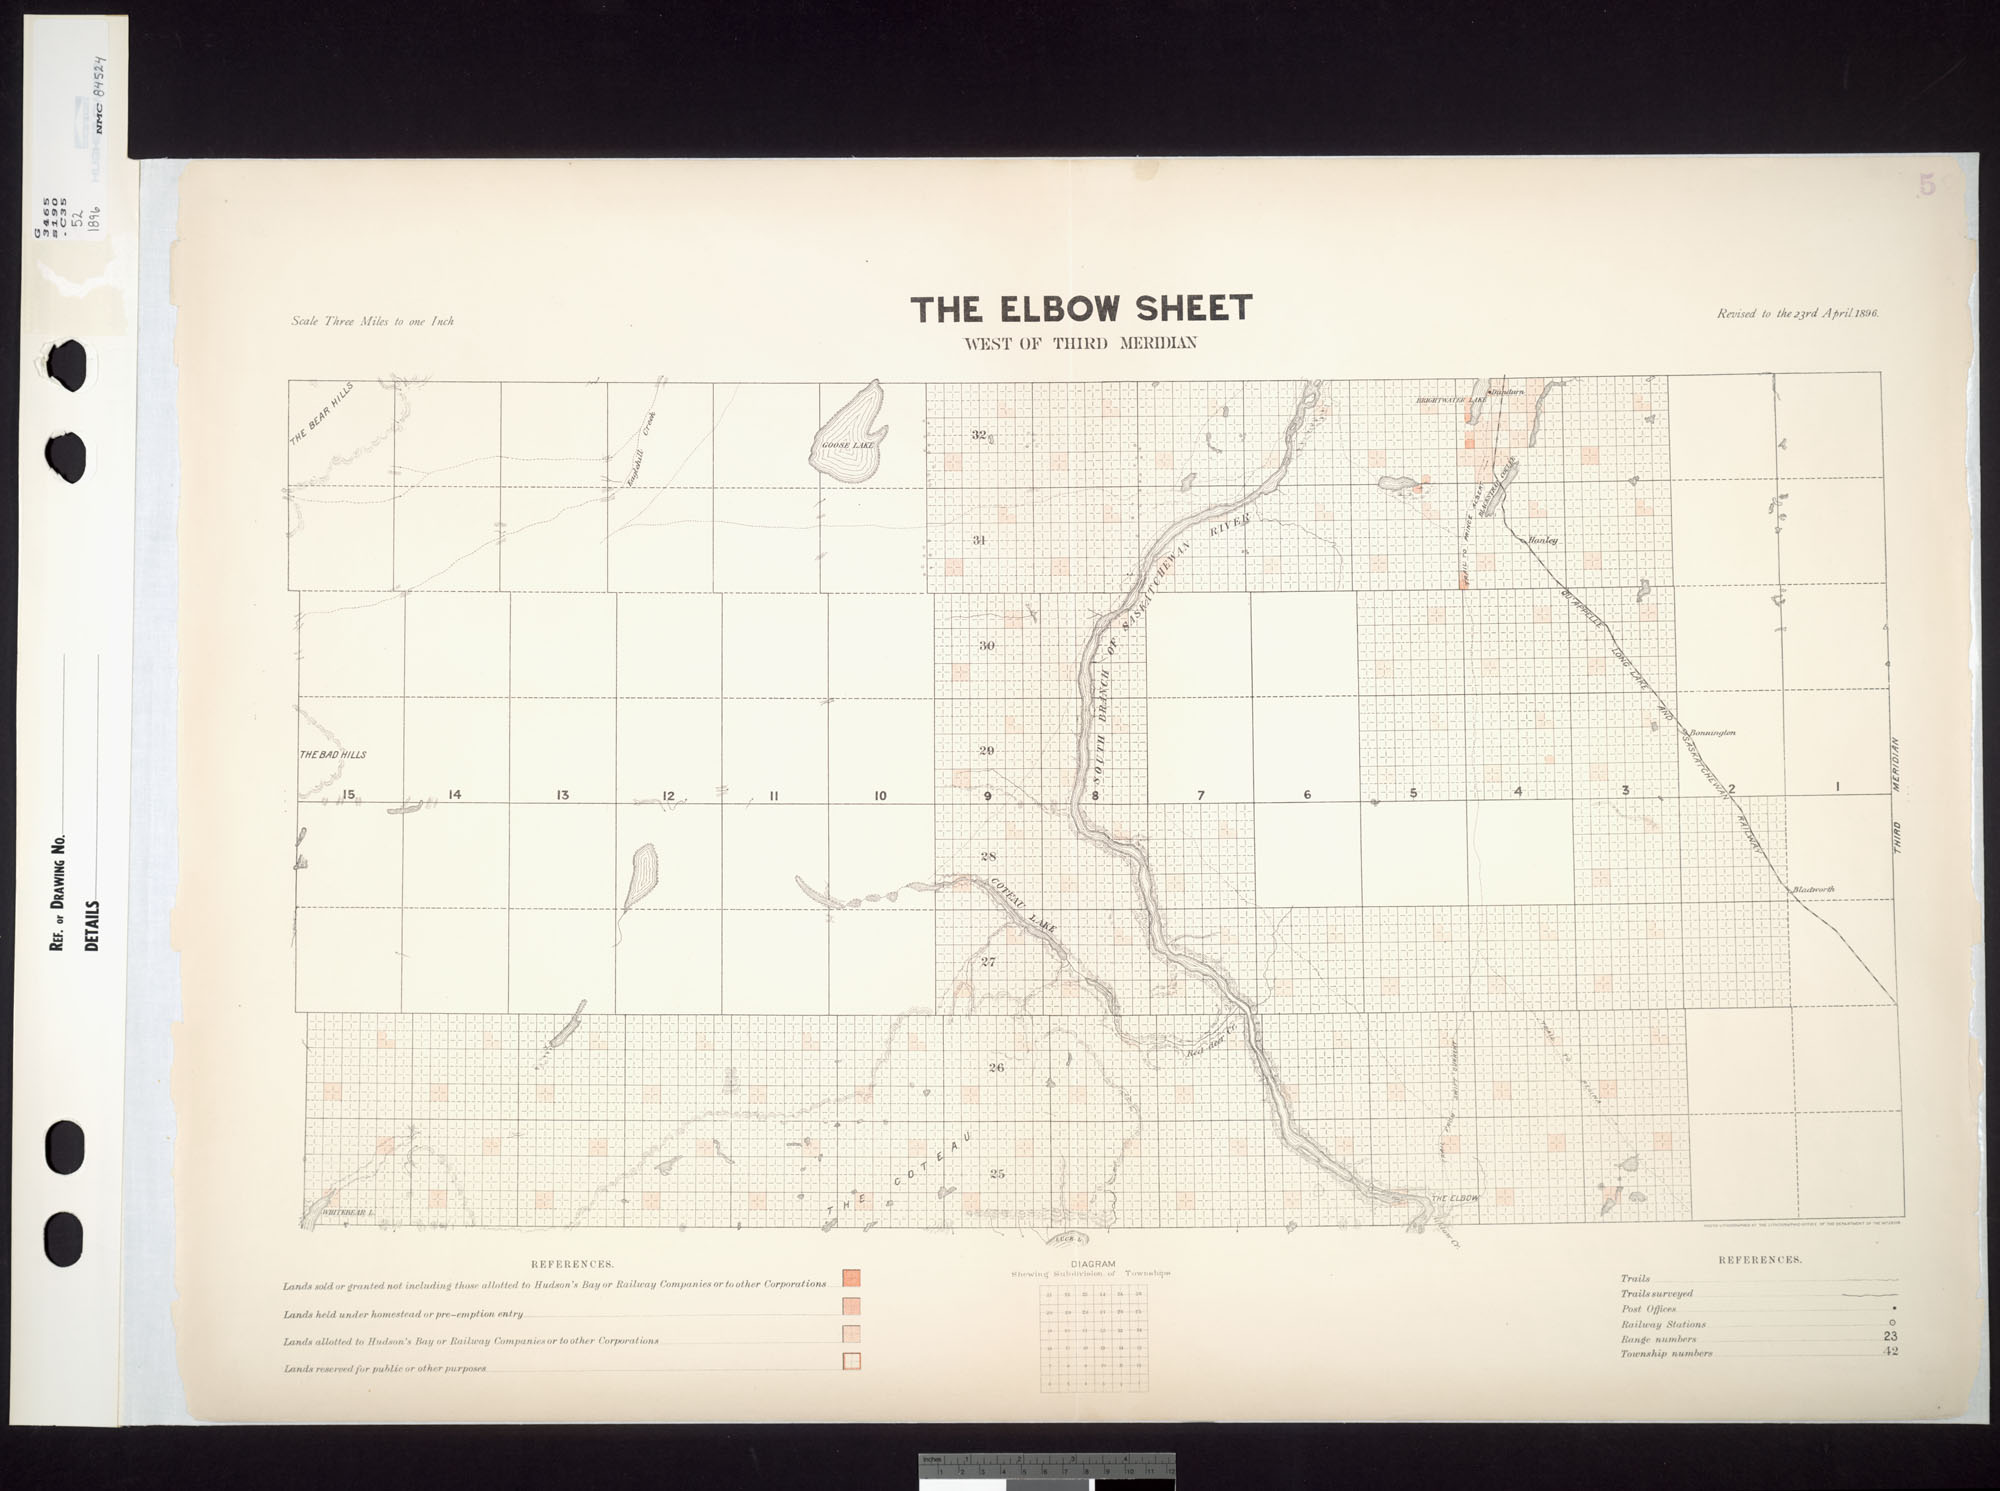 Digitized image of map no. 52, The Elbow, west of the third meridian, MIKAN 3703995, image number e002419296